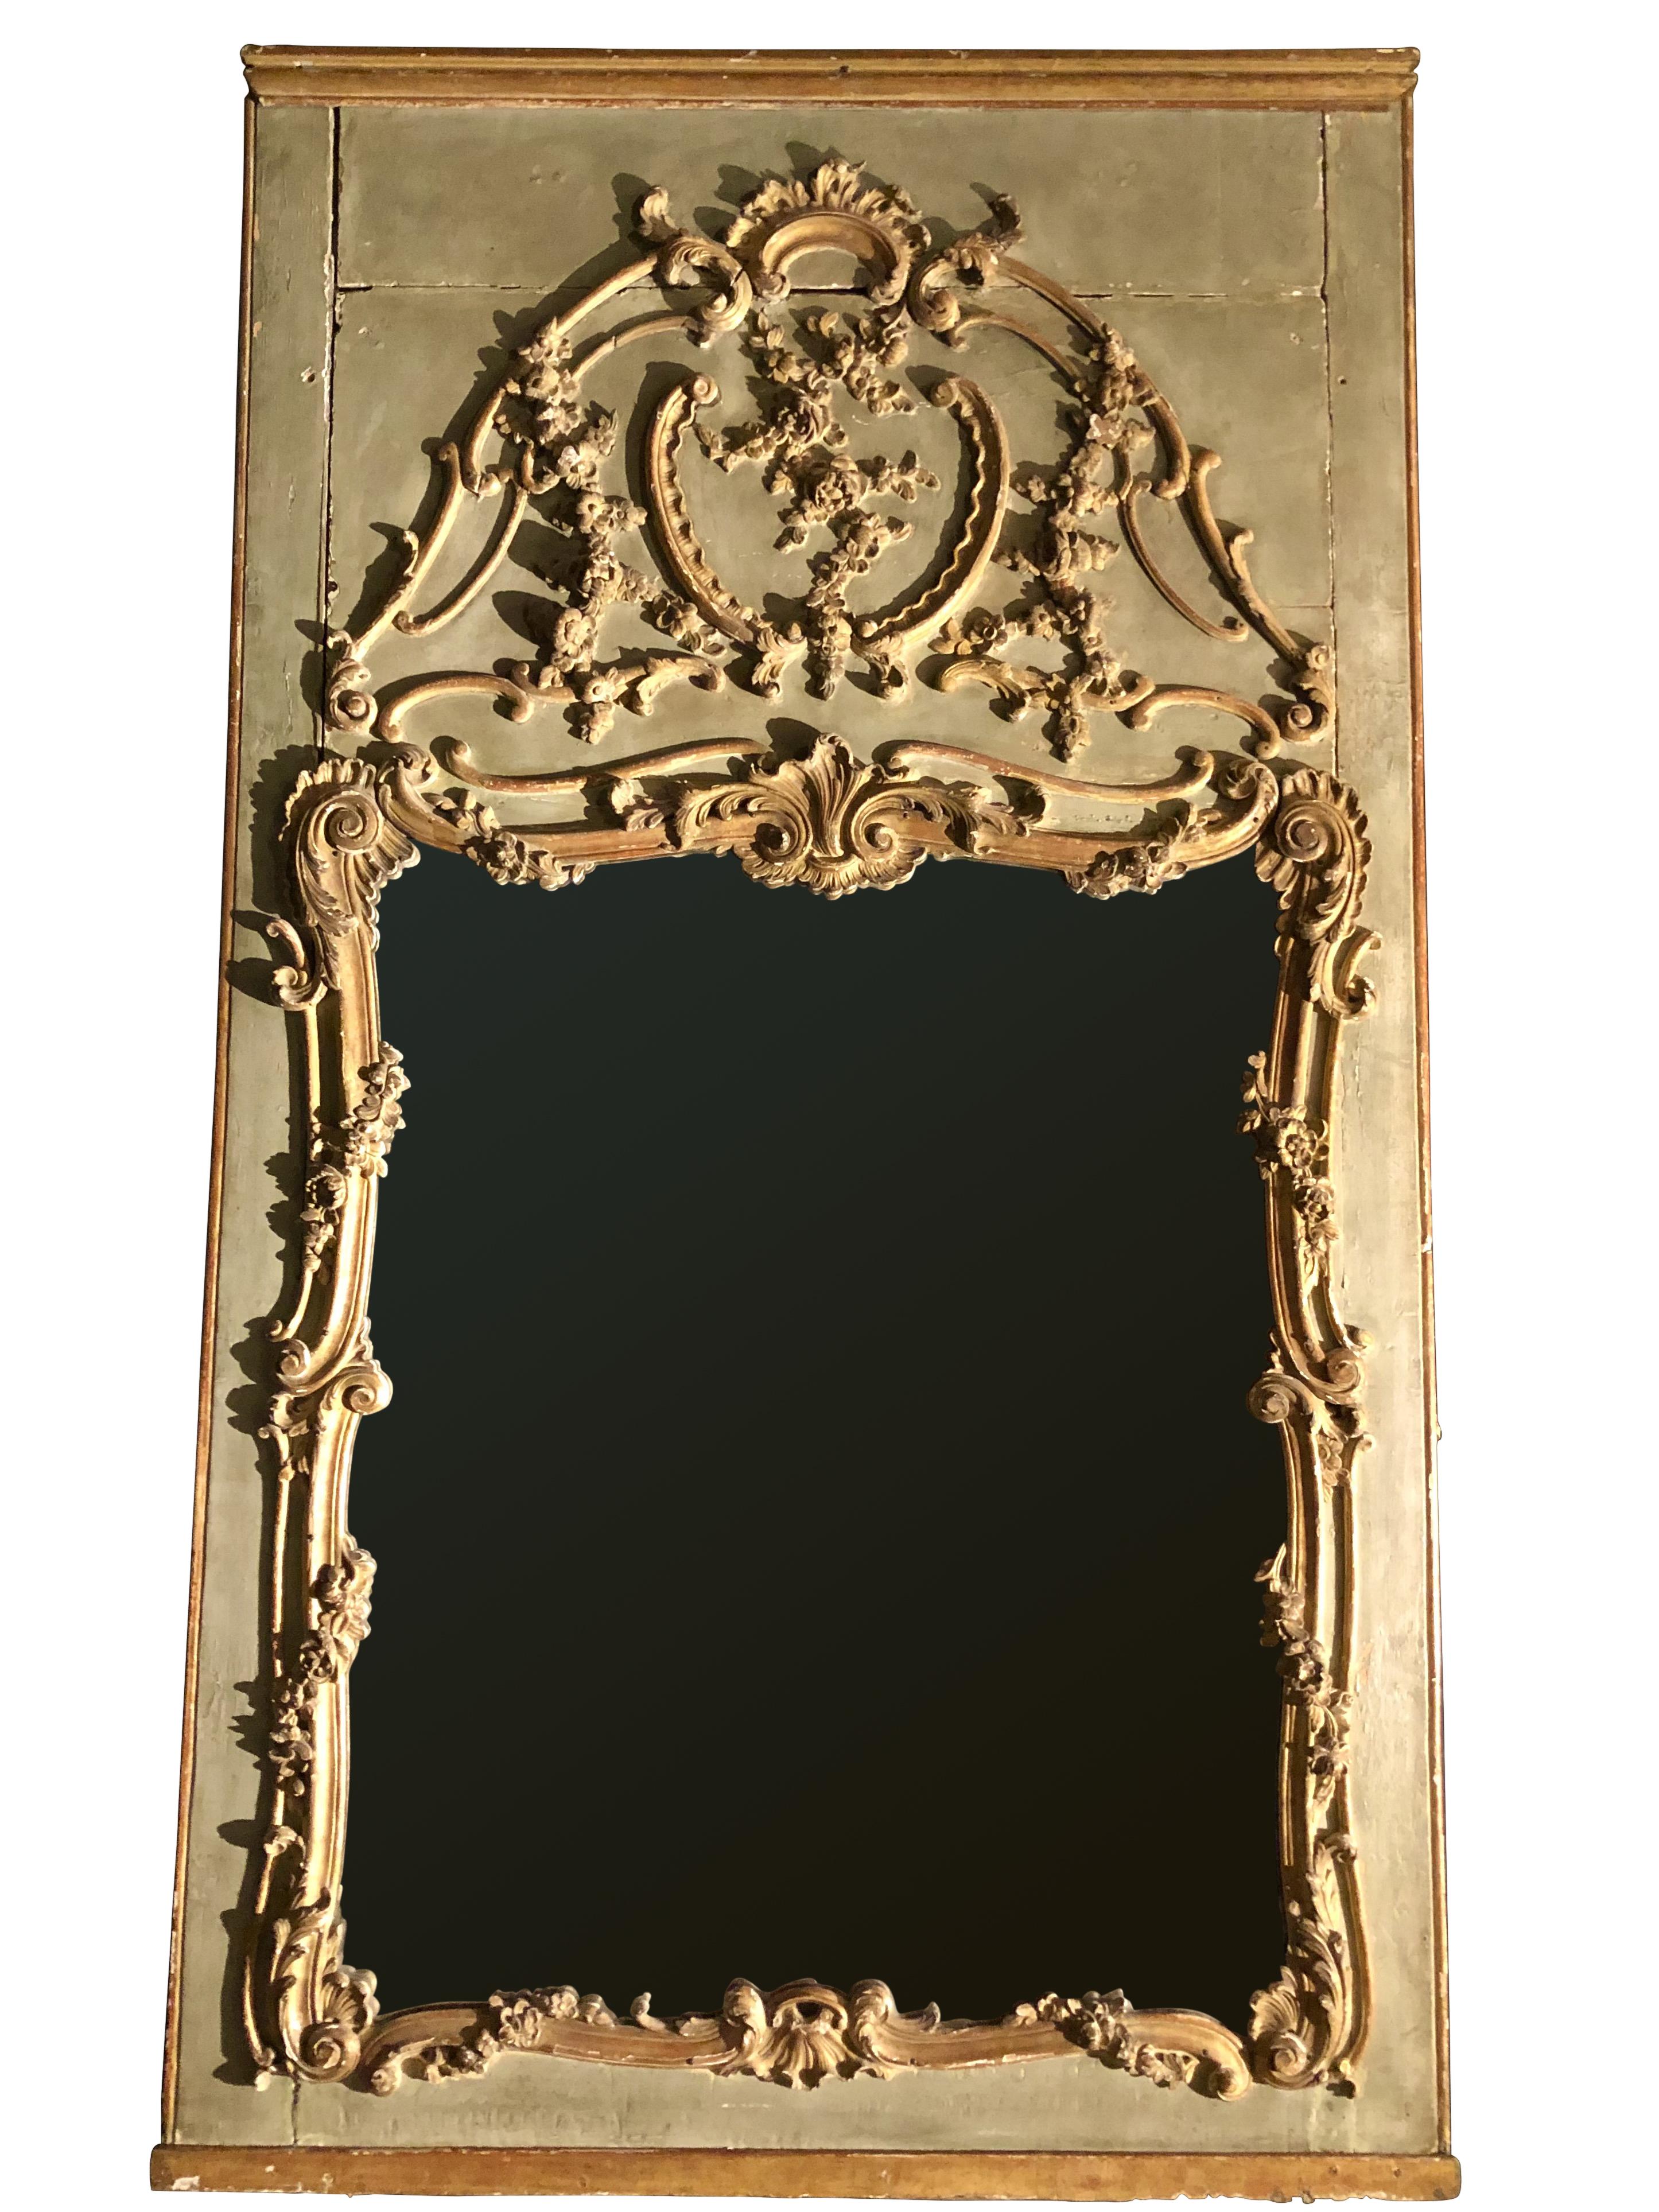 Elegant wooden trumeau in water green and gilded lacquered wood, carved with shells, foliage, garlands. Original mercury mirror.
Parisian work
France
18th century.